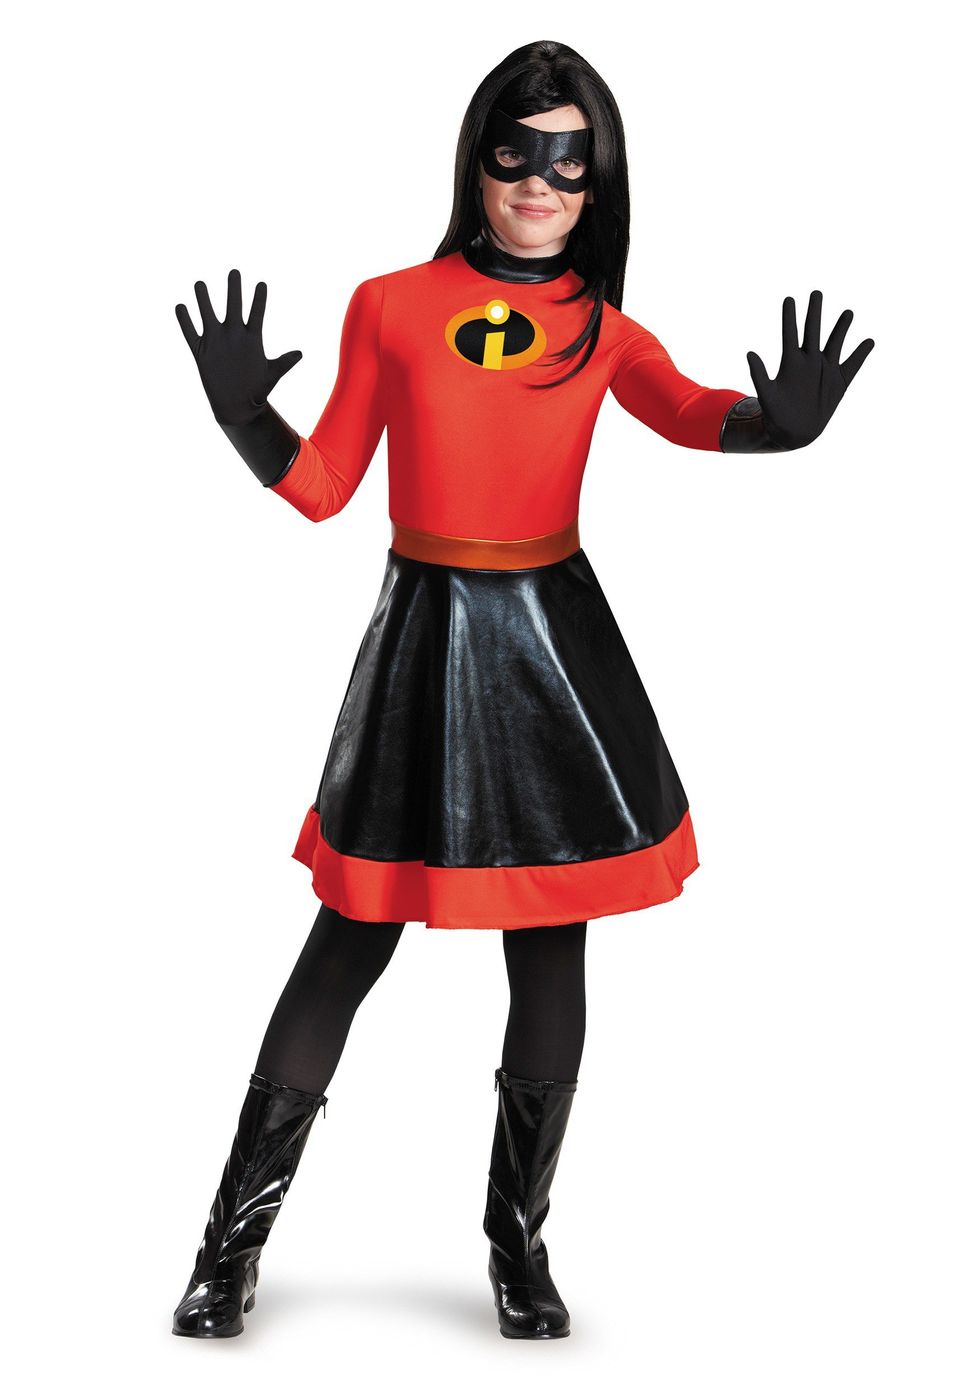 Violet from "The Incredibles"